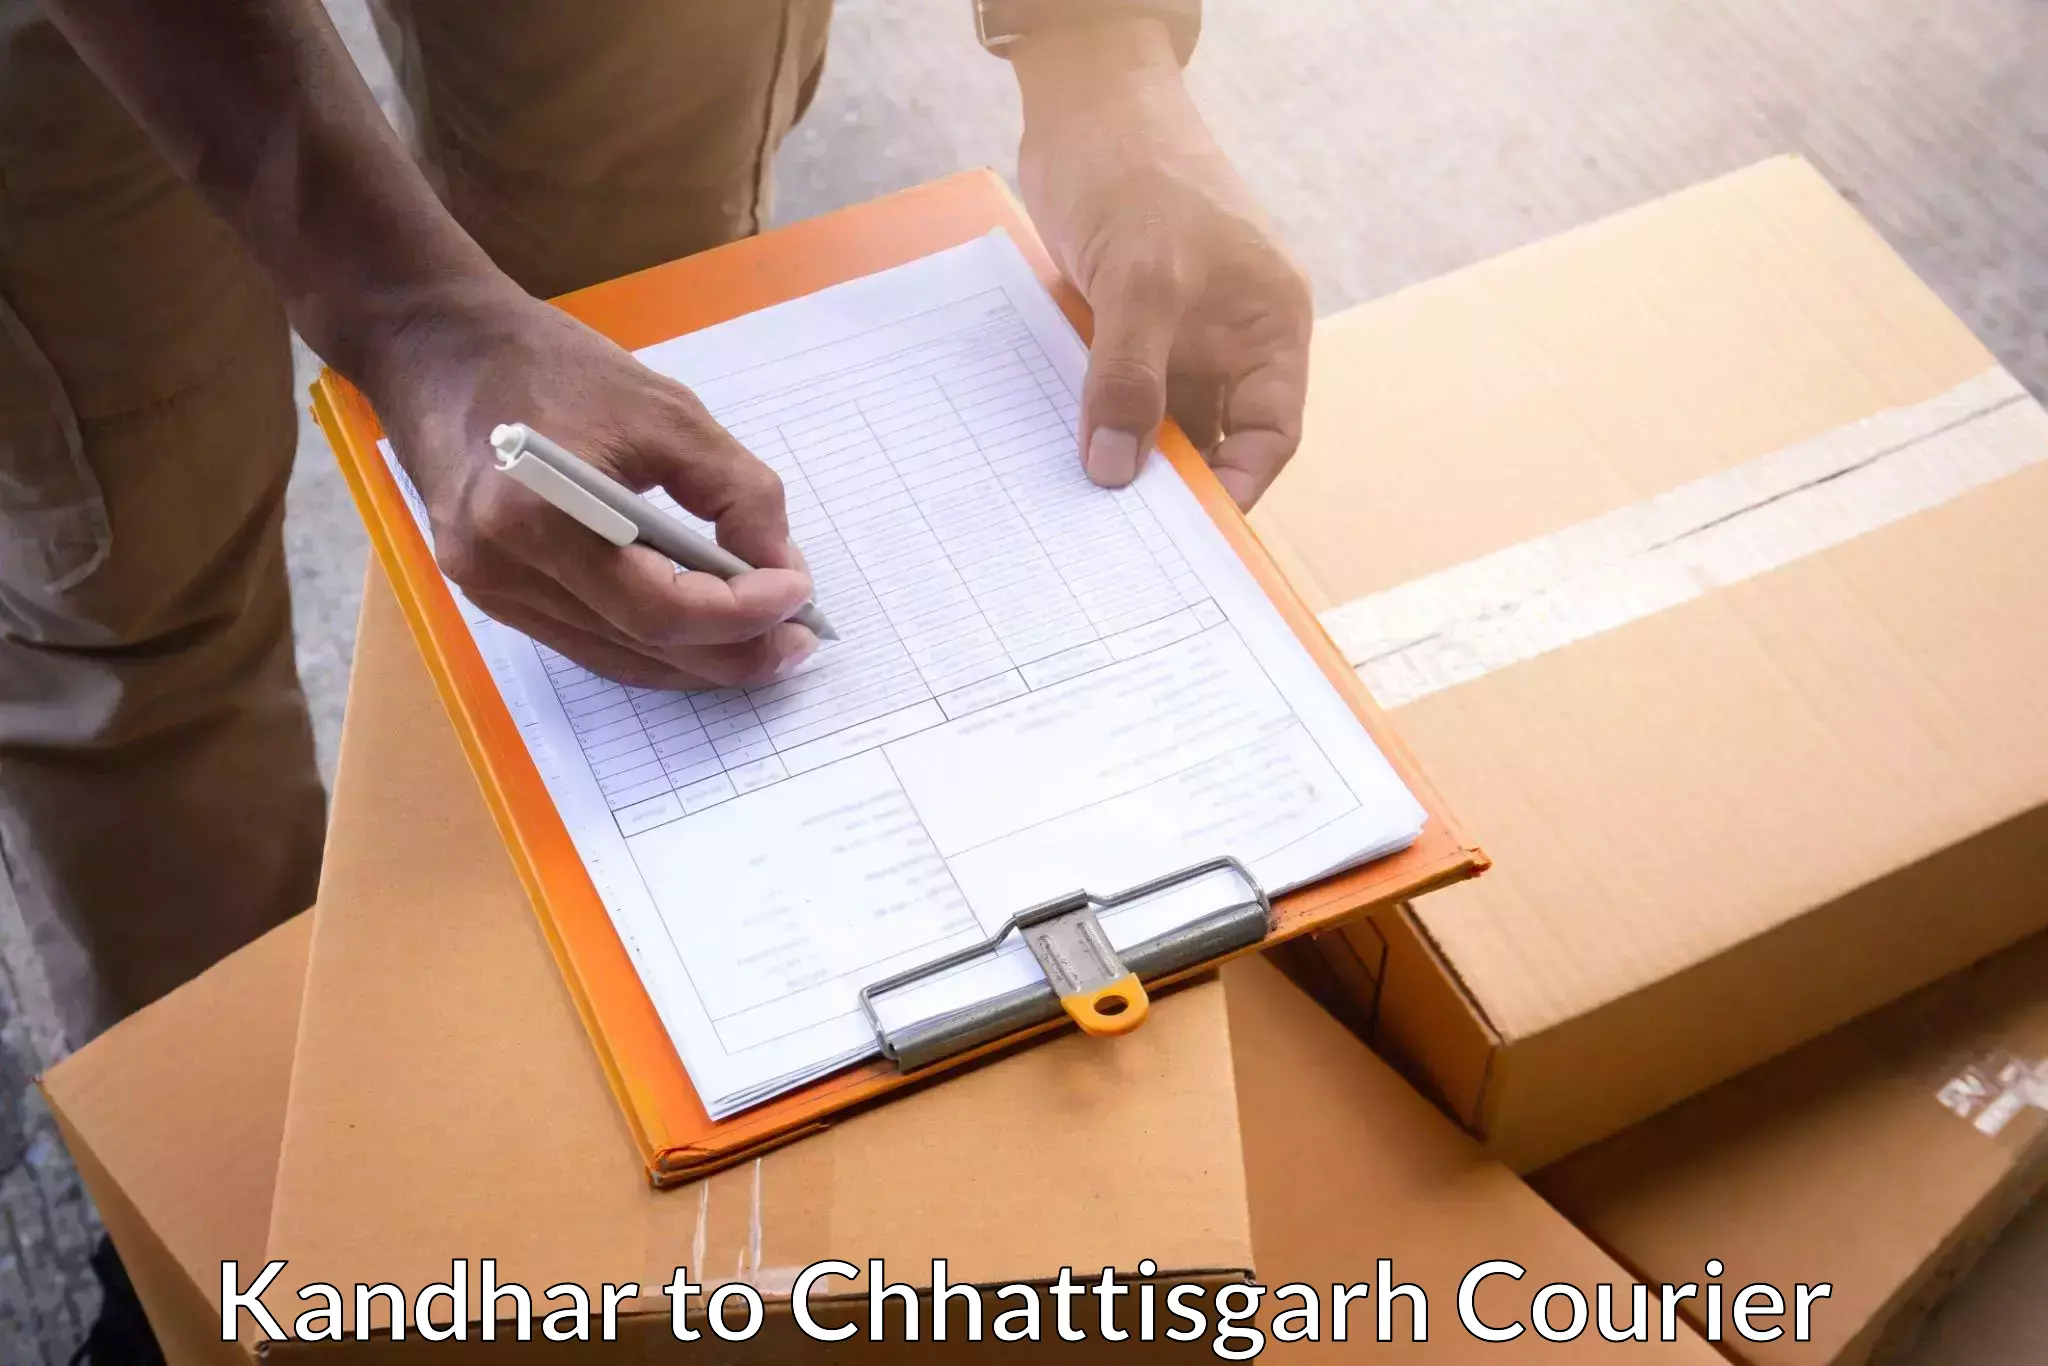 Multi-national courier services Kandhar to Bastar